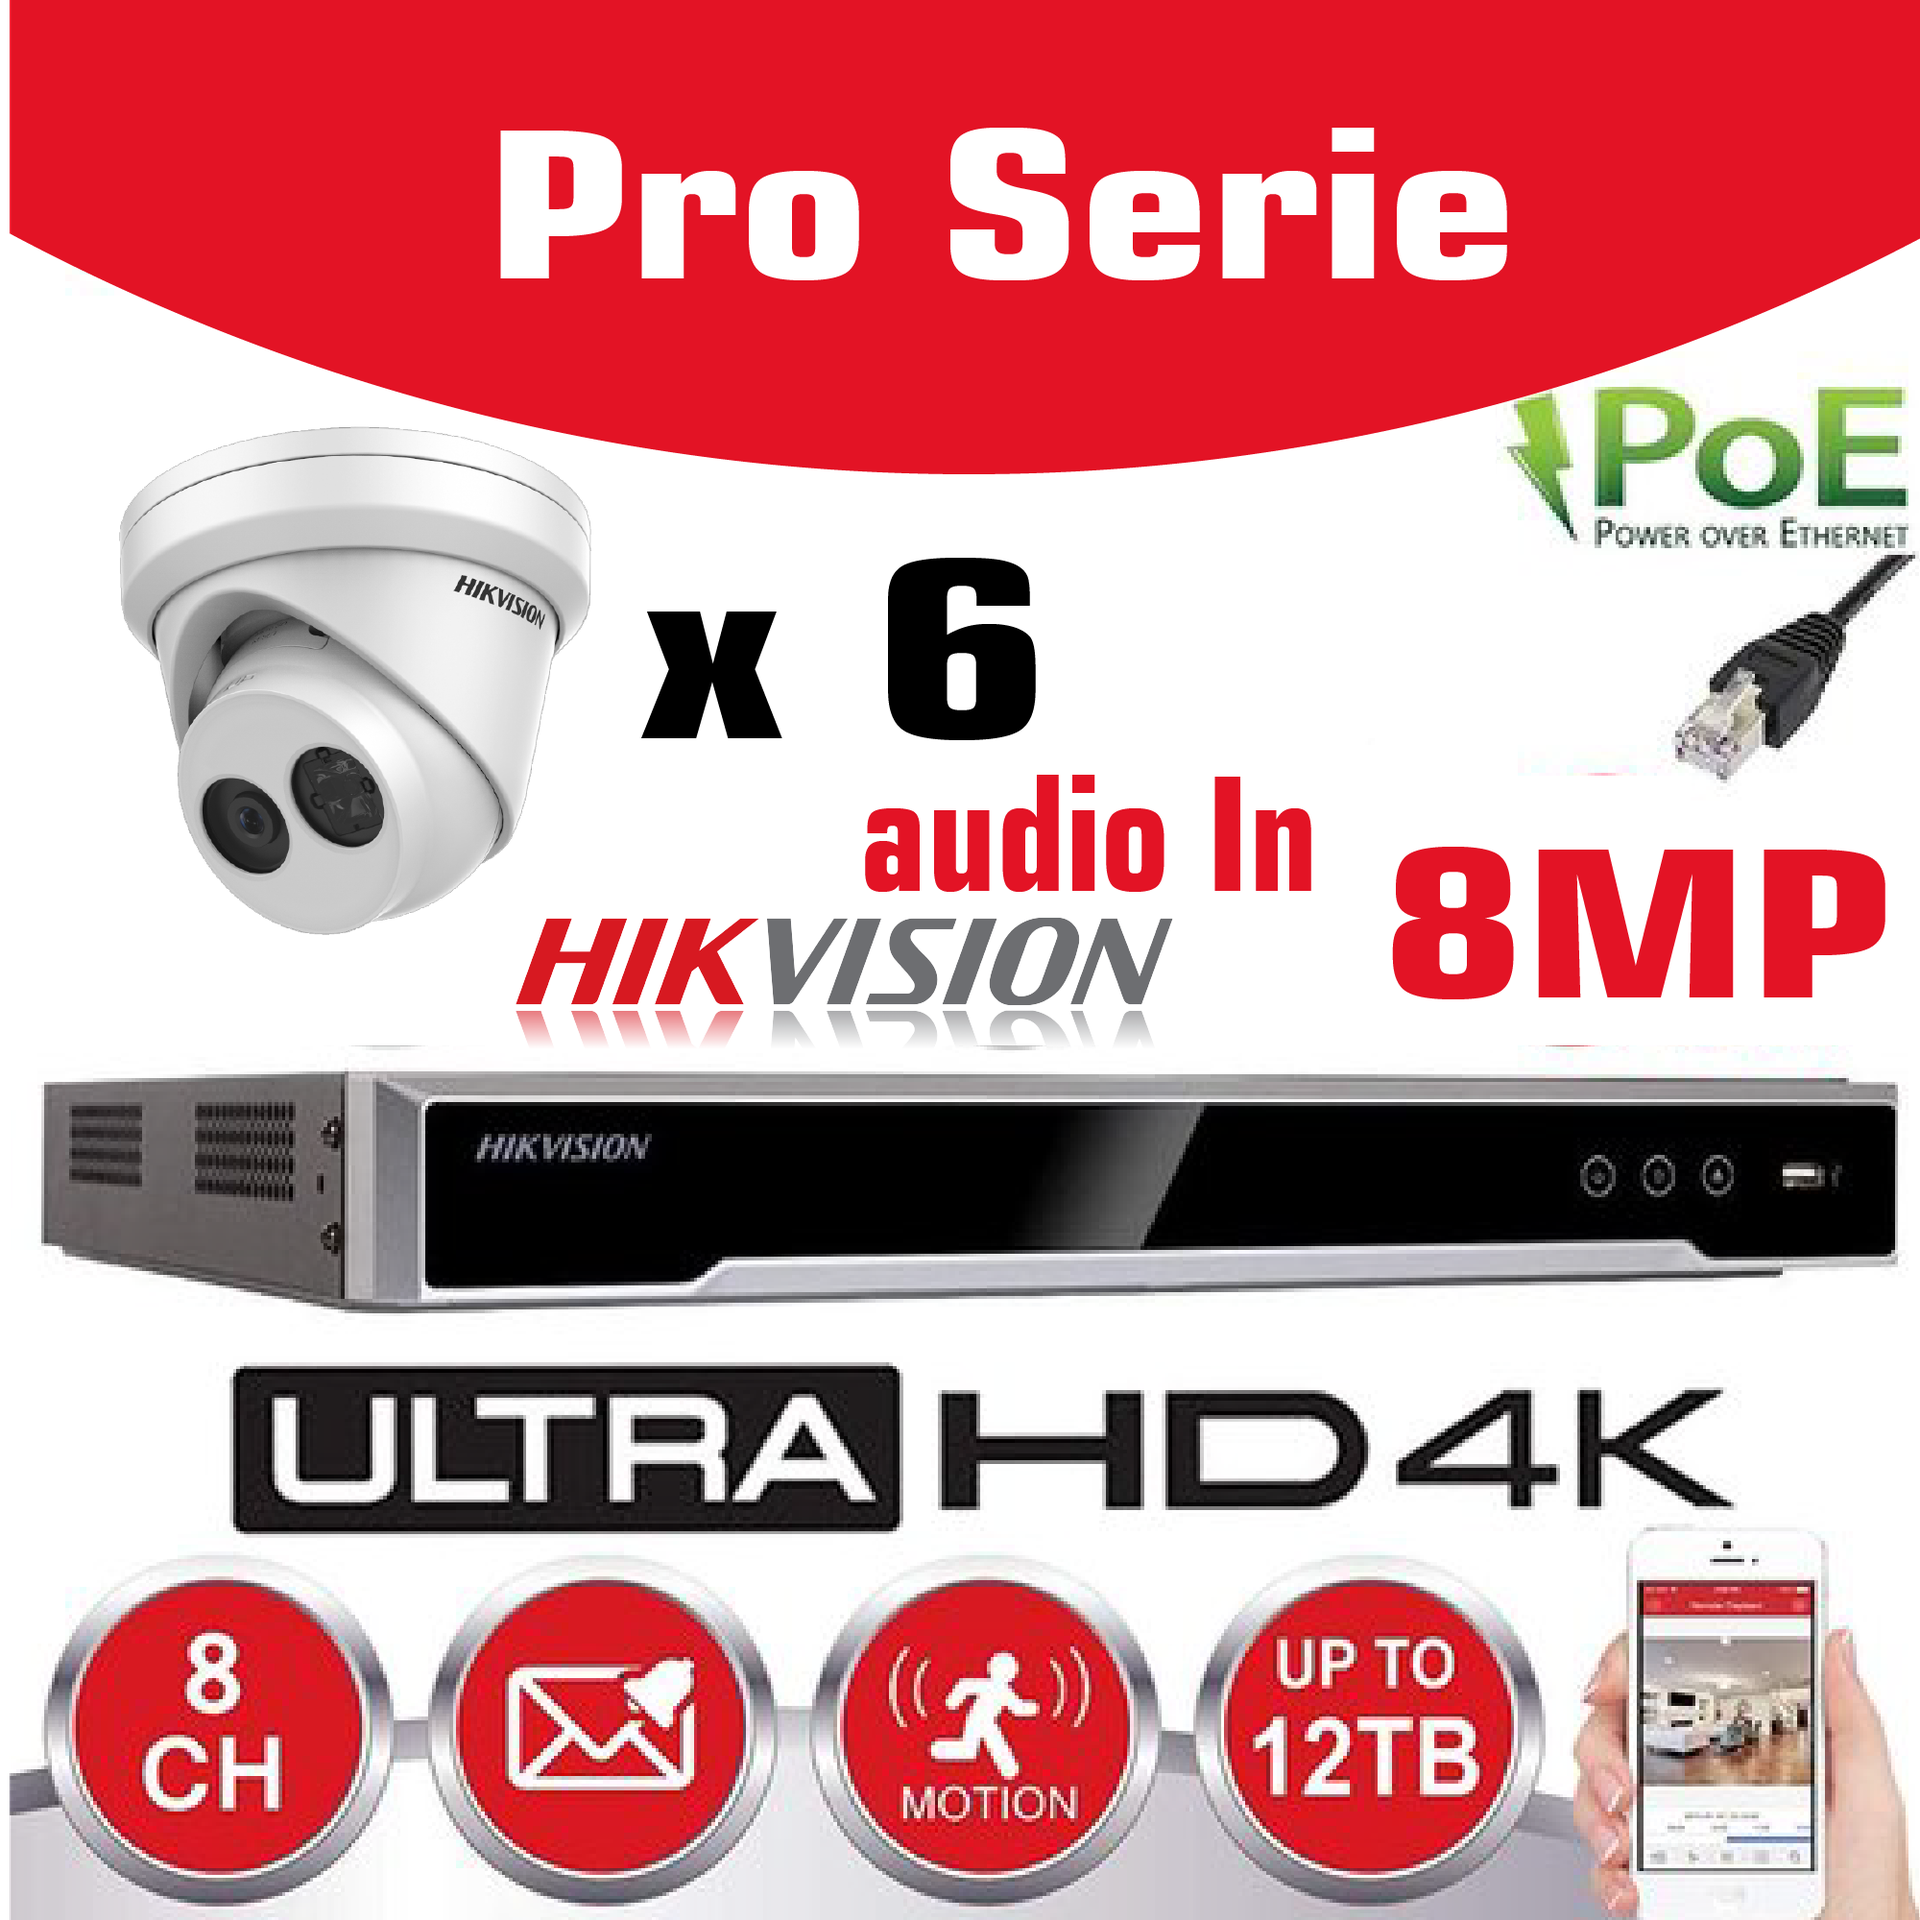 [HIKPRO-8M6T] HIKVISION 8MP Surveillance Camera Kit  Pro Serie - NVR 8Ch  4K UHD IP POE - 6x 8MP IP CAMERA Pro-Serie In/Outdoor Night Vision IR Up to 30m - 6TB HDD Storage 